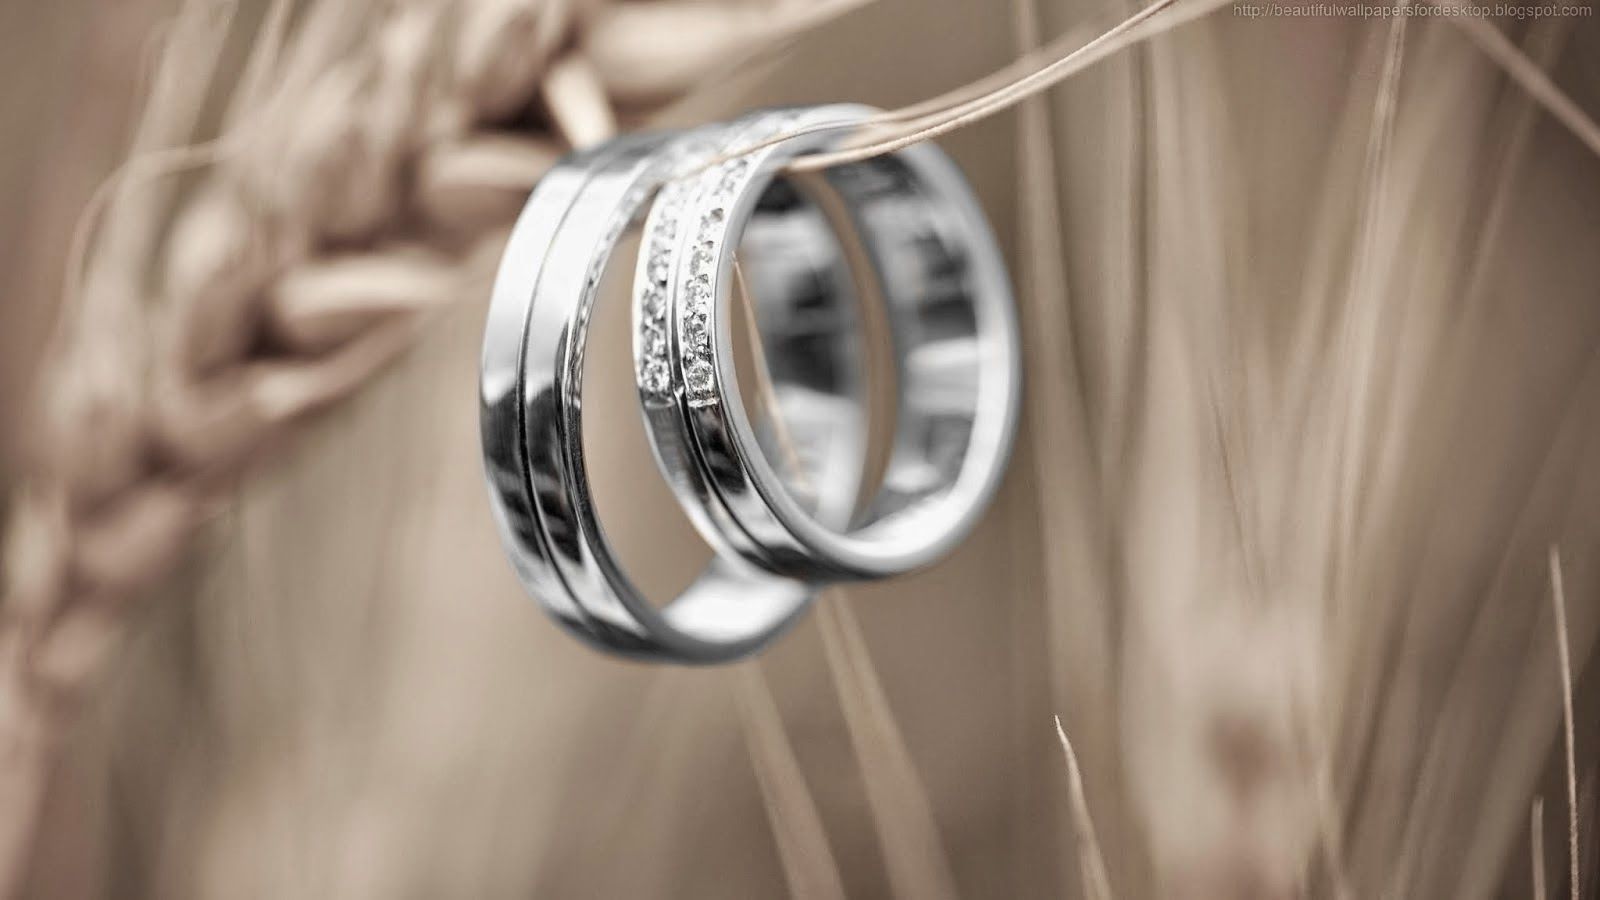 Hd Wallpapers Of Engagement Rings - 1600x900 Wallpaper 